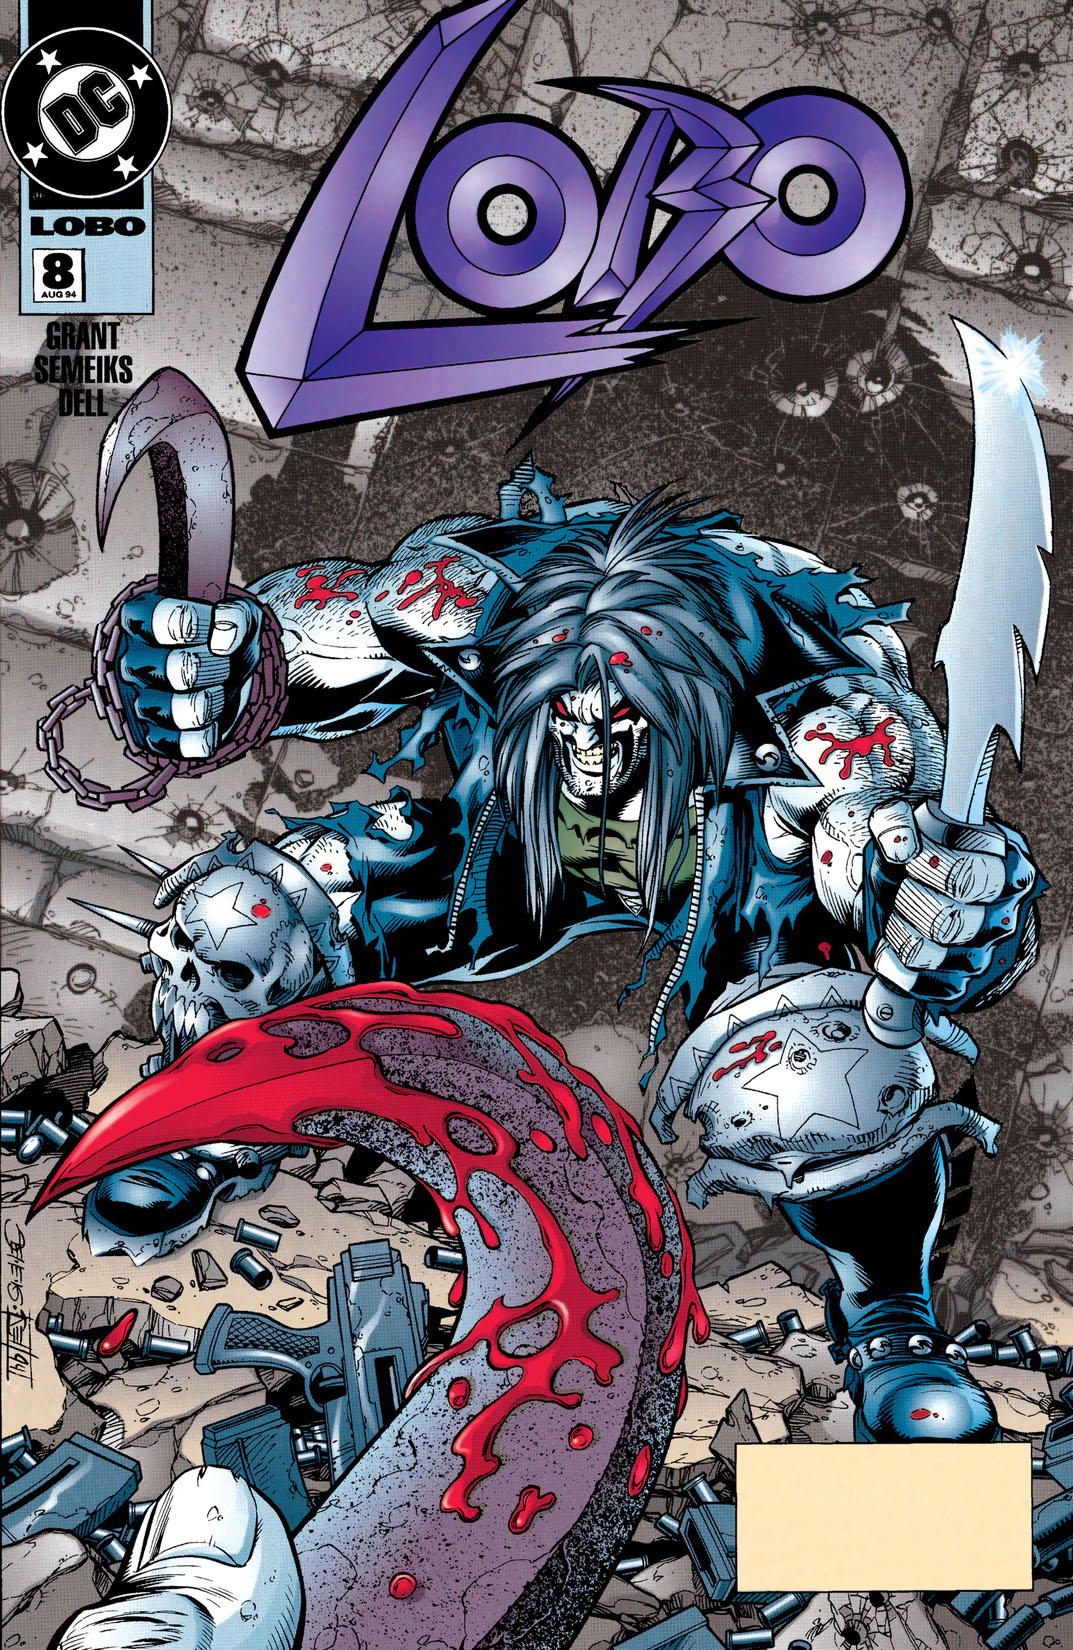 Lobo (1993-) #8 preview images